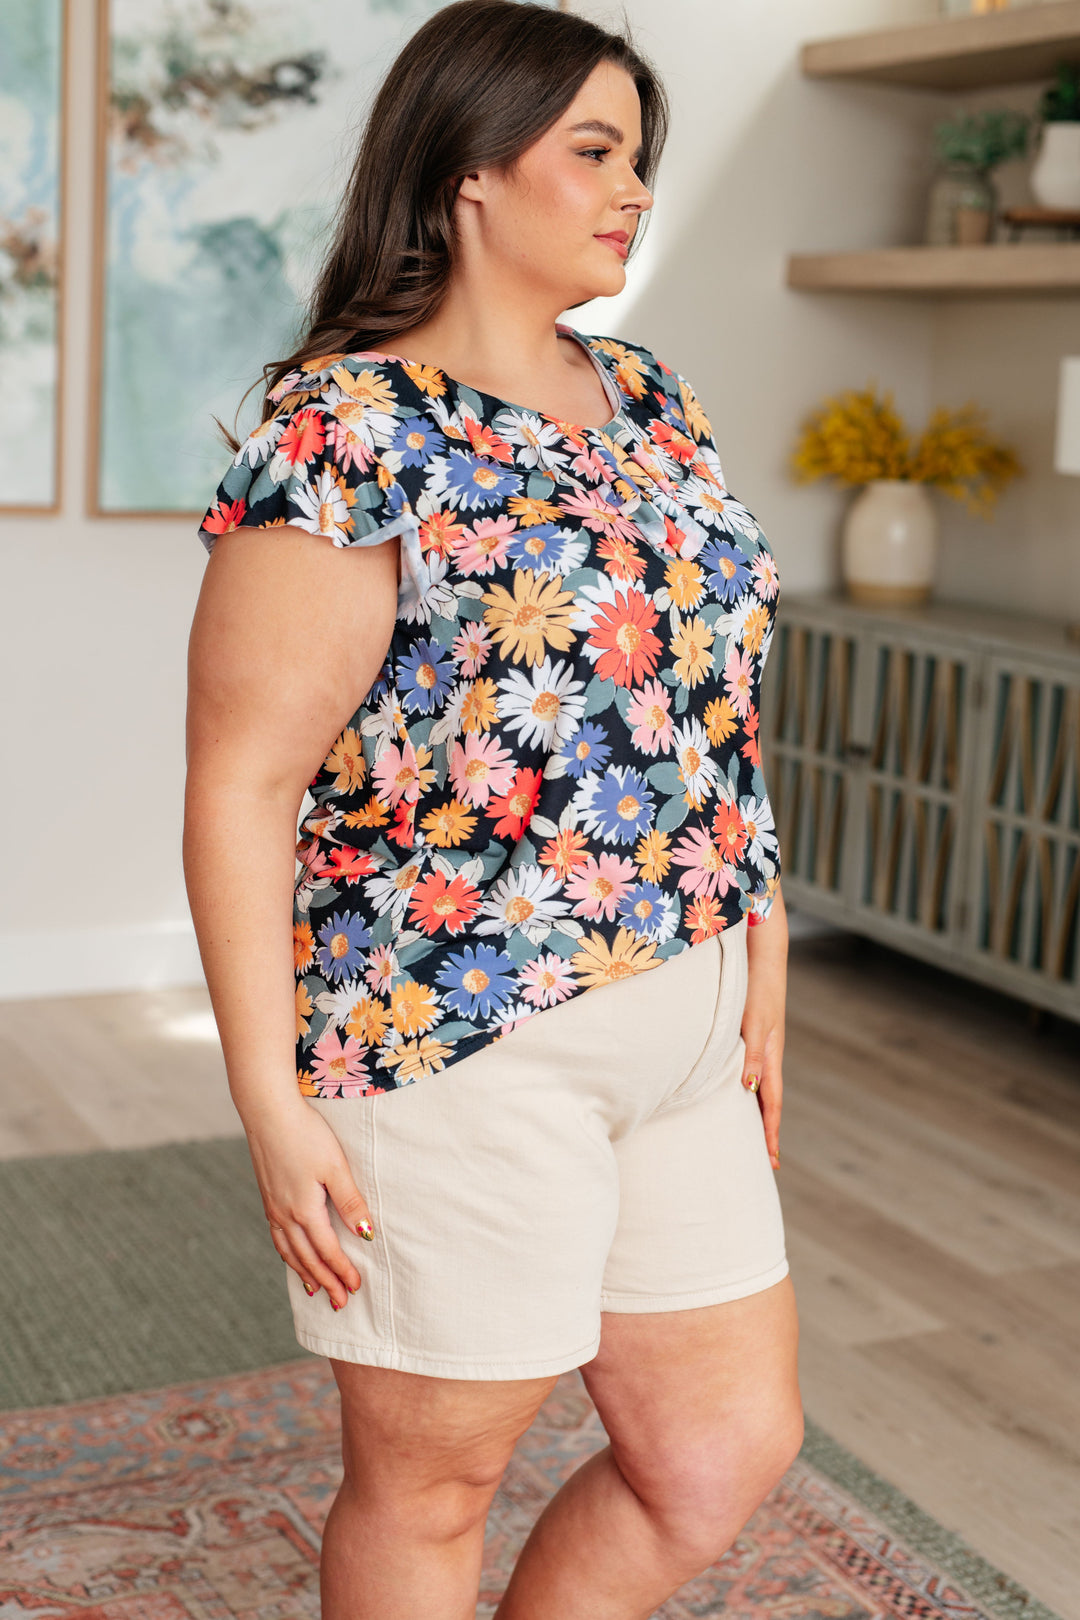 Flower Power Floral Top-100 Short Sleeve Tops-Inspired by Justeen-Women's Clothing Boutique in Chicago, Illinois